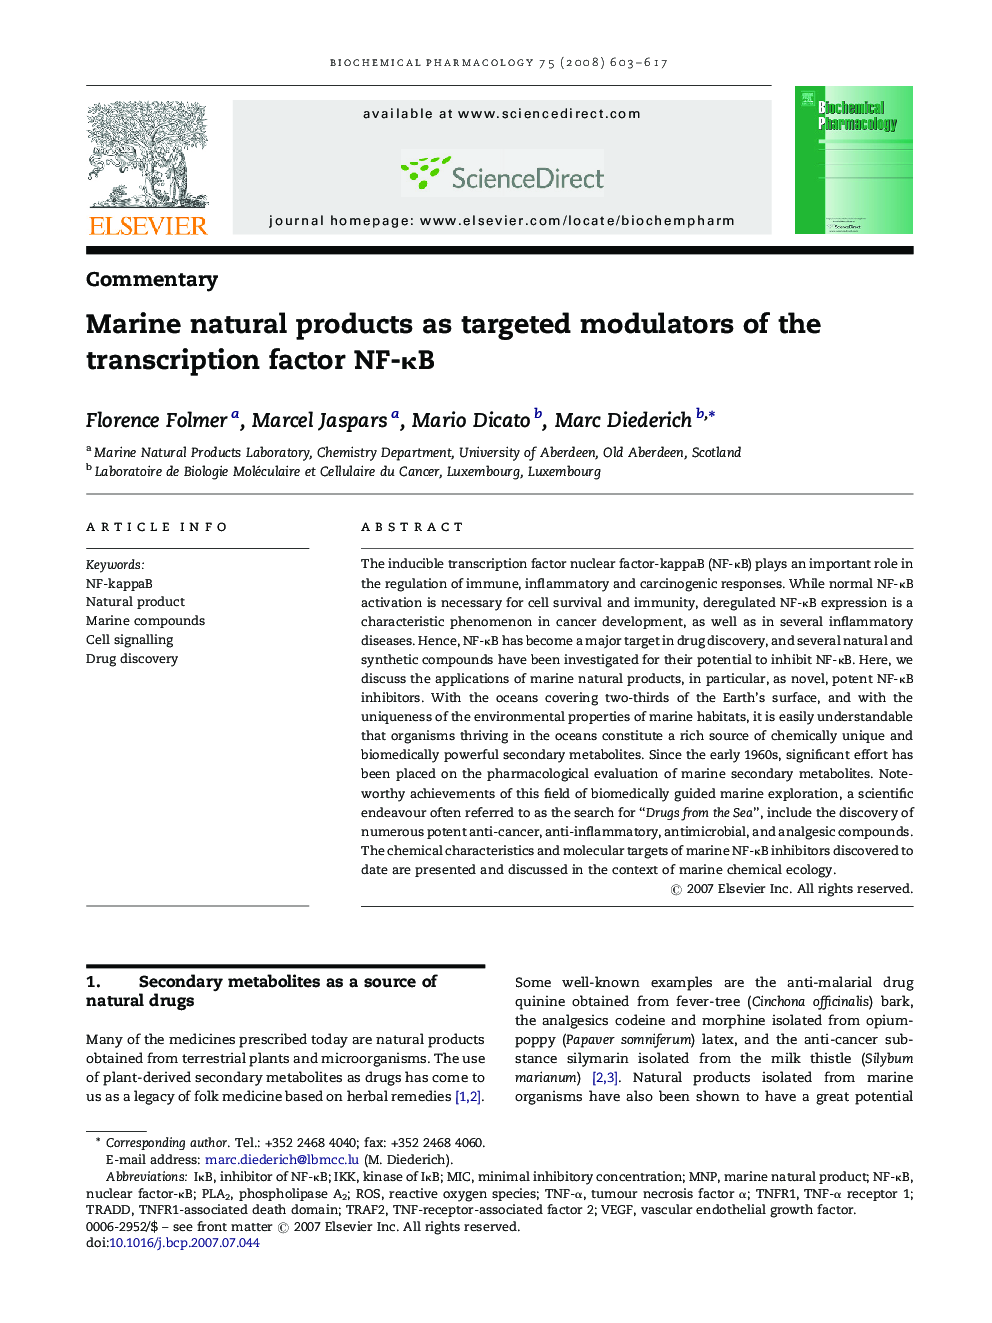 Marine natural products as targeted modulators of the transcription factor NF-κB